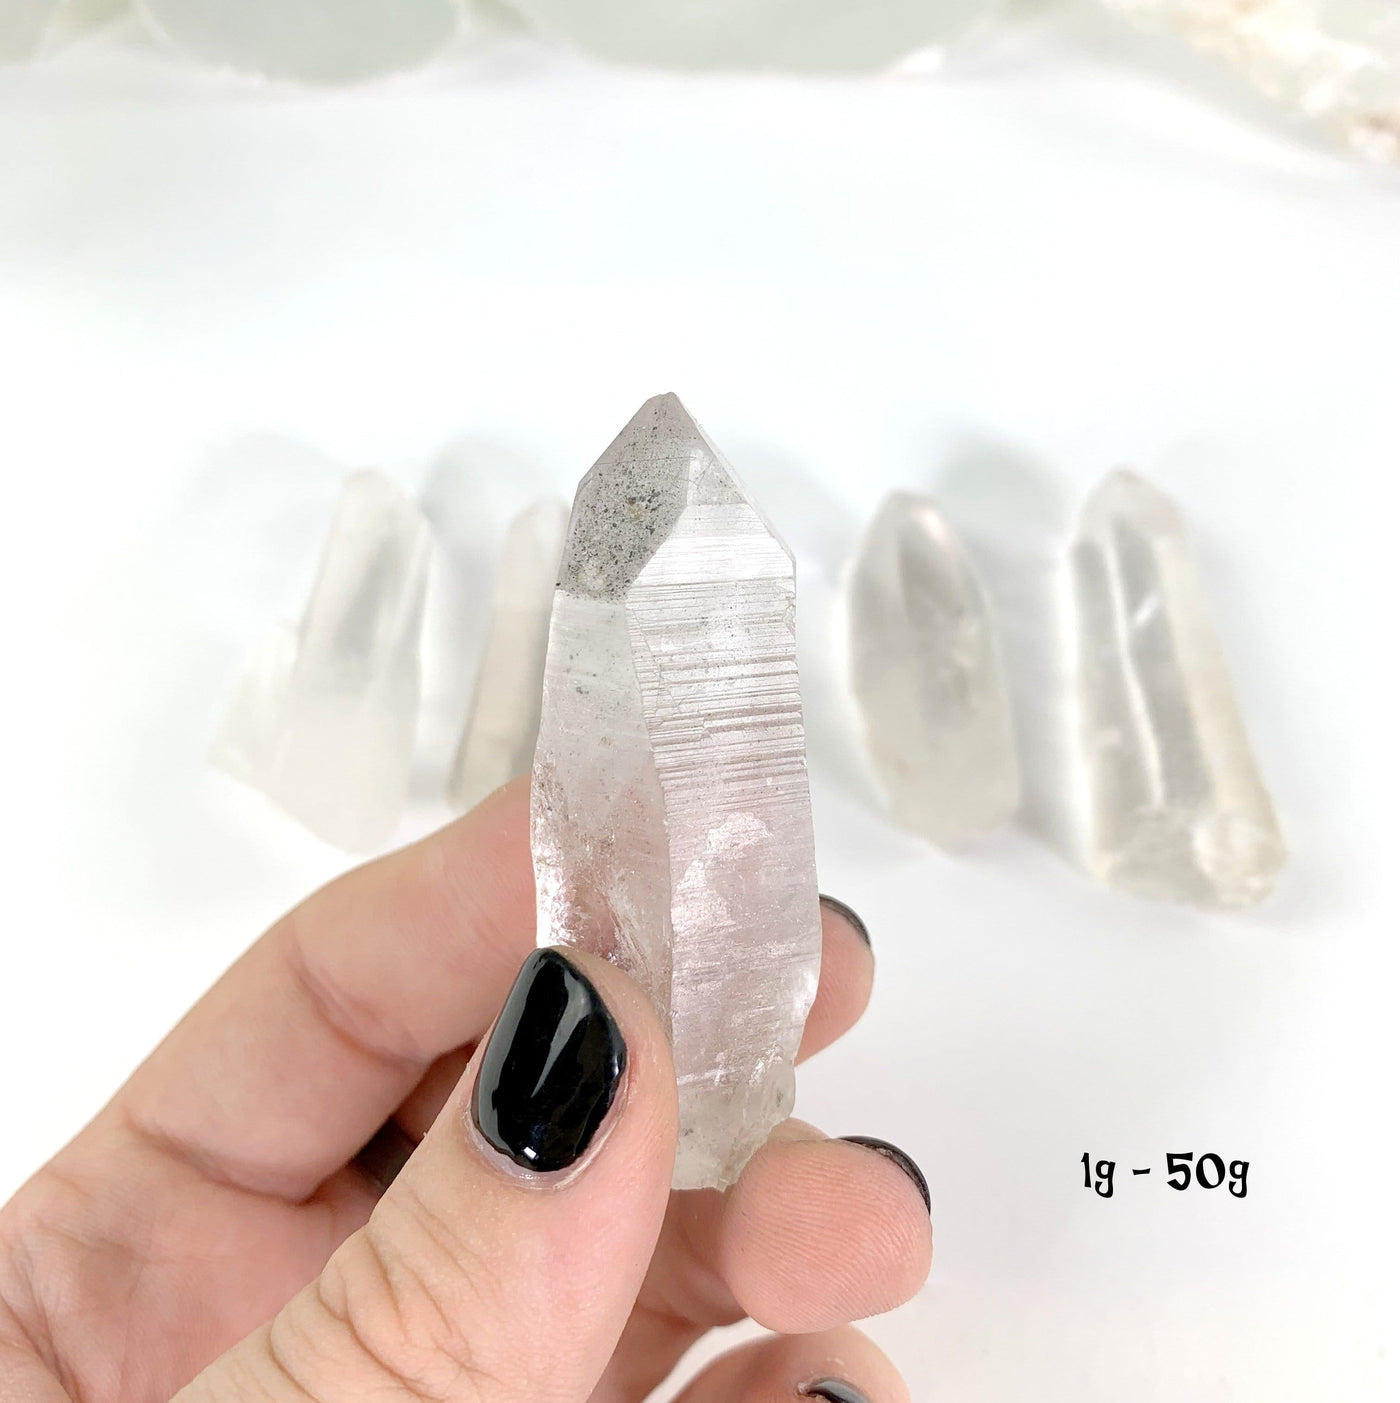 Natural Lemurian Quartz Points in weight 1g-50g in hand for size reference